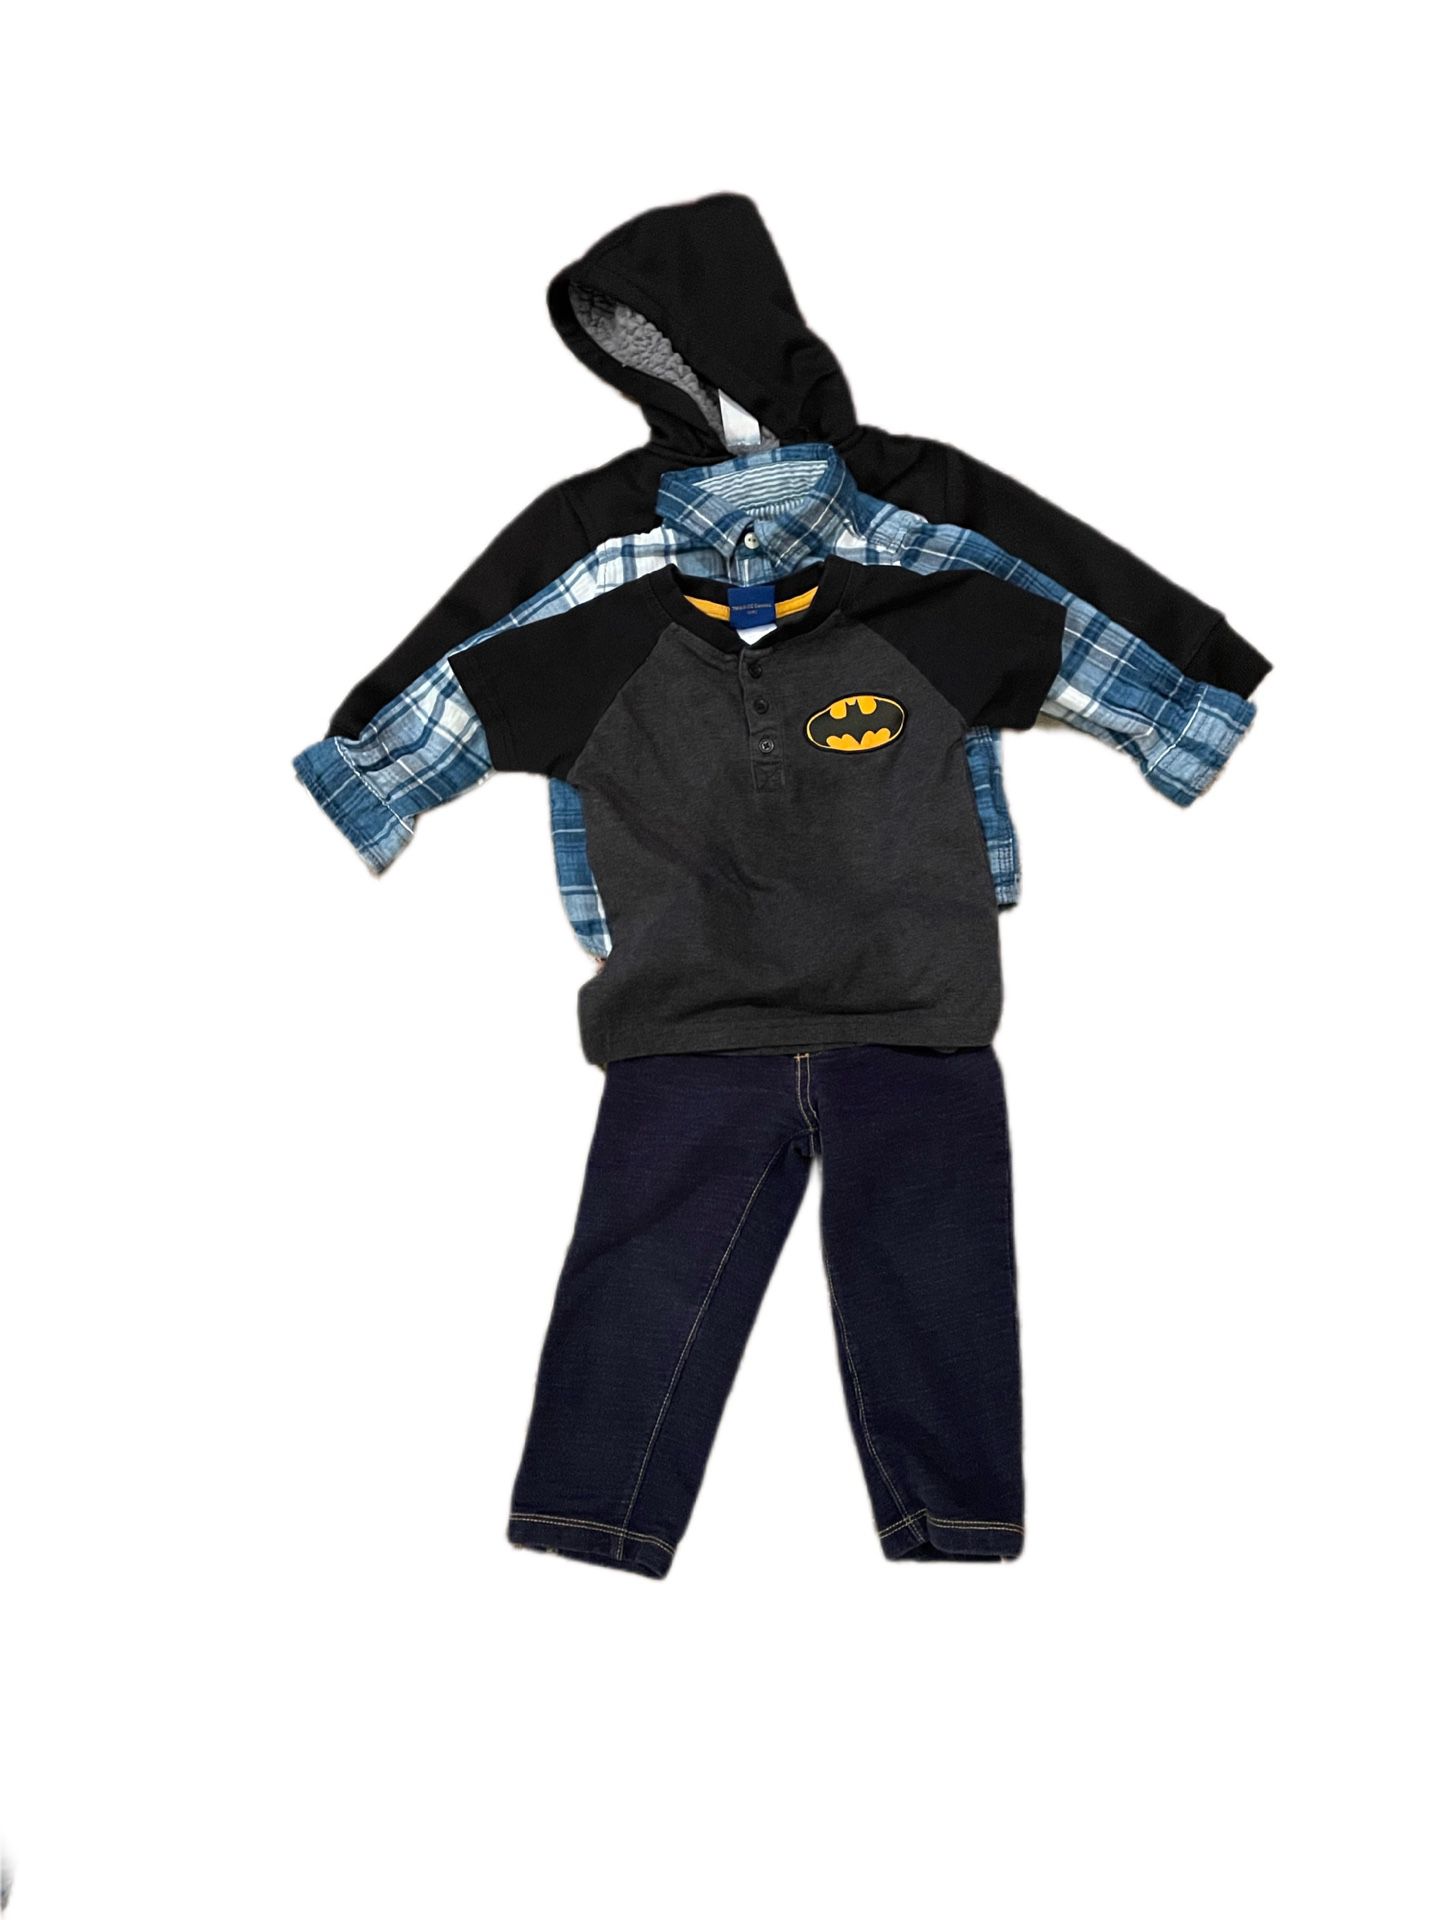 Dress your GQ Little Man in Style with our Batman Bundle